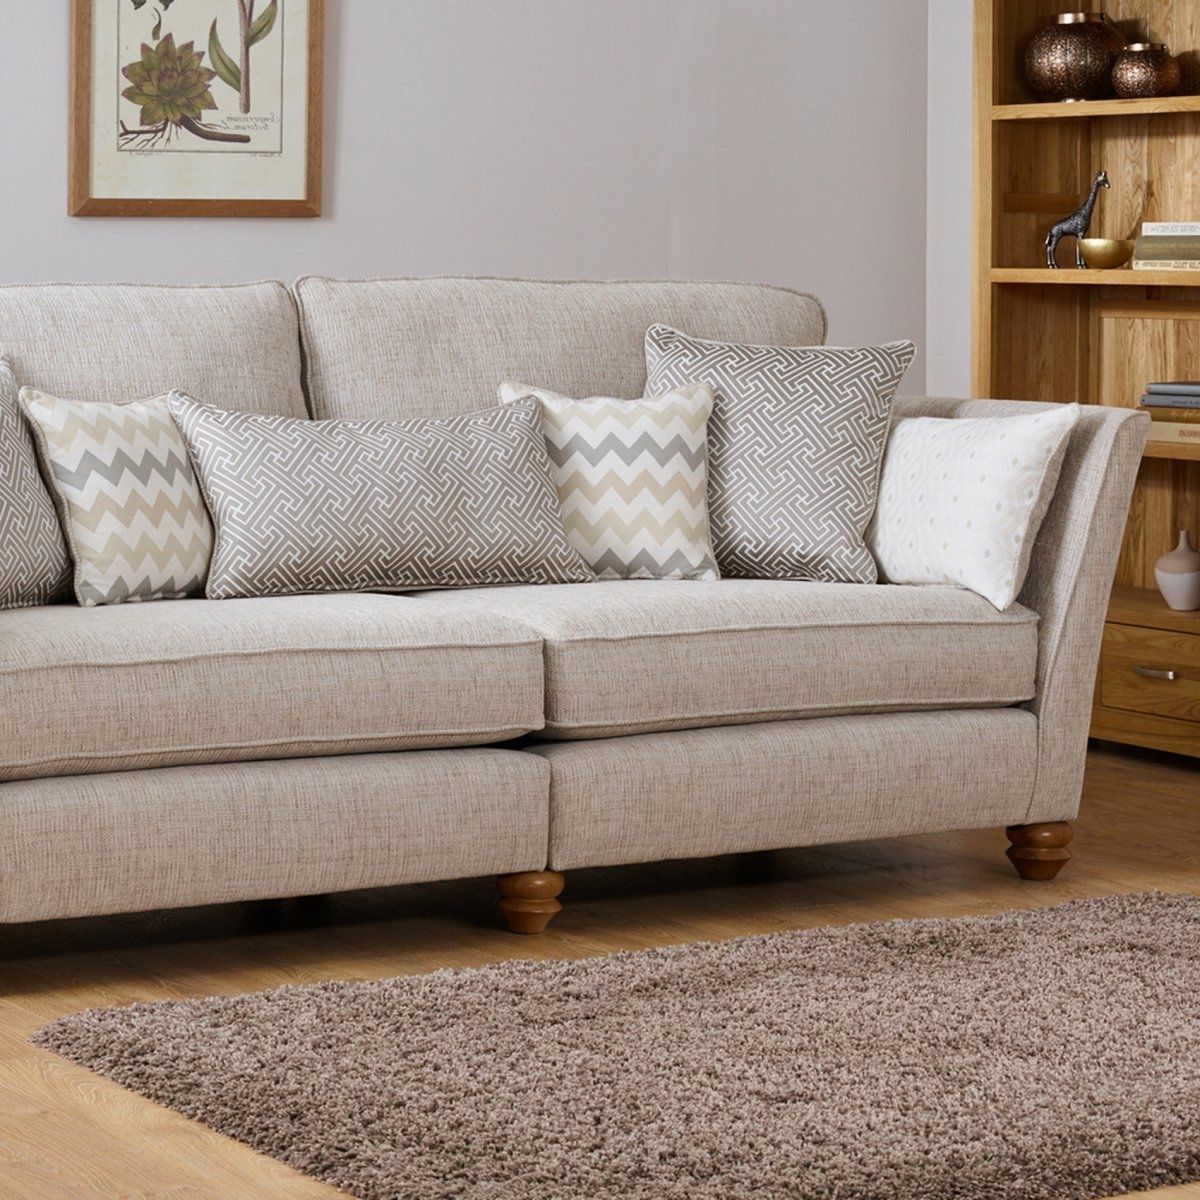 Widely Used Four Seater Sofas Throughout Gainsborough 2 Seater Sofa In Beigeoak Furniture Land (View 11 of 15)